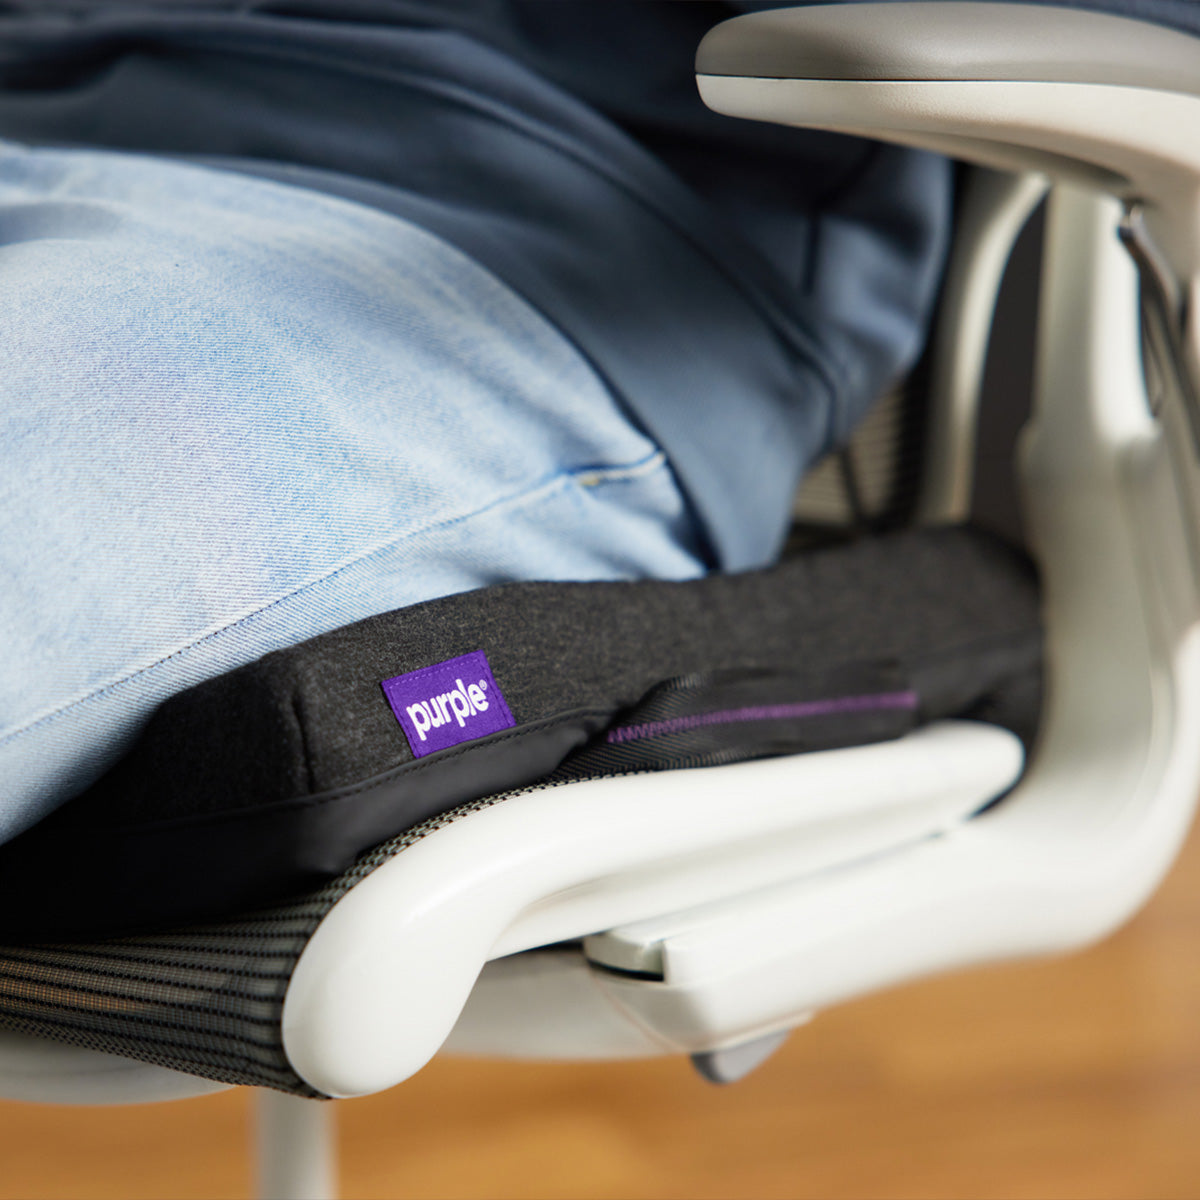 Person Sitting On The Purple Double Seat Cushion That Is Placed On An Office Chair